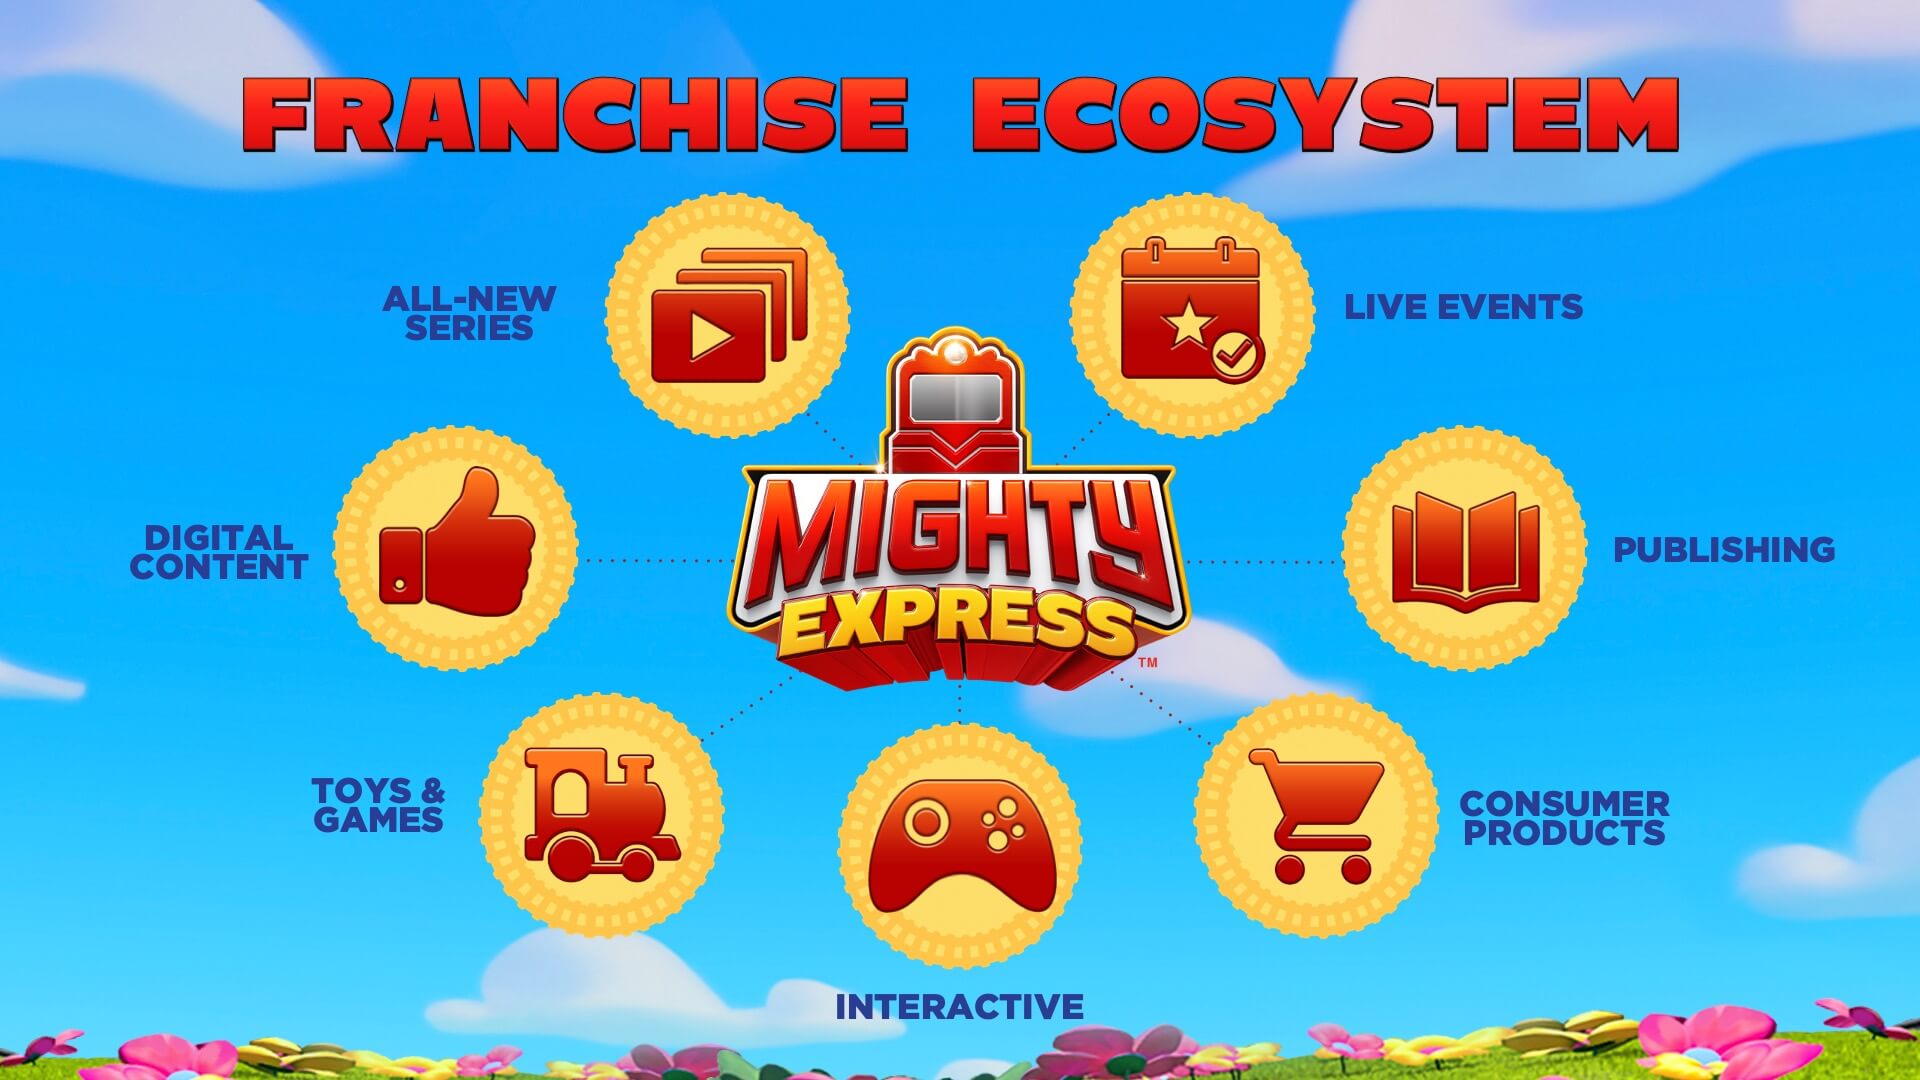 Mighty Express Pitch Deck